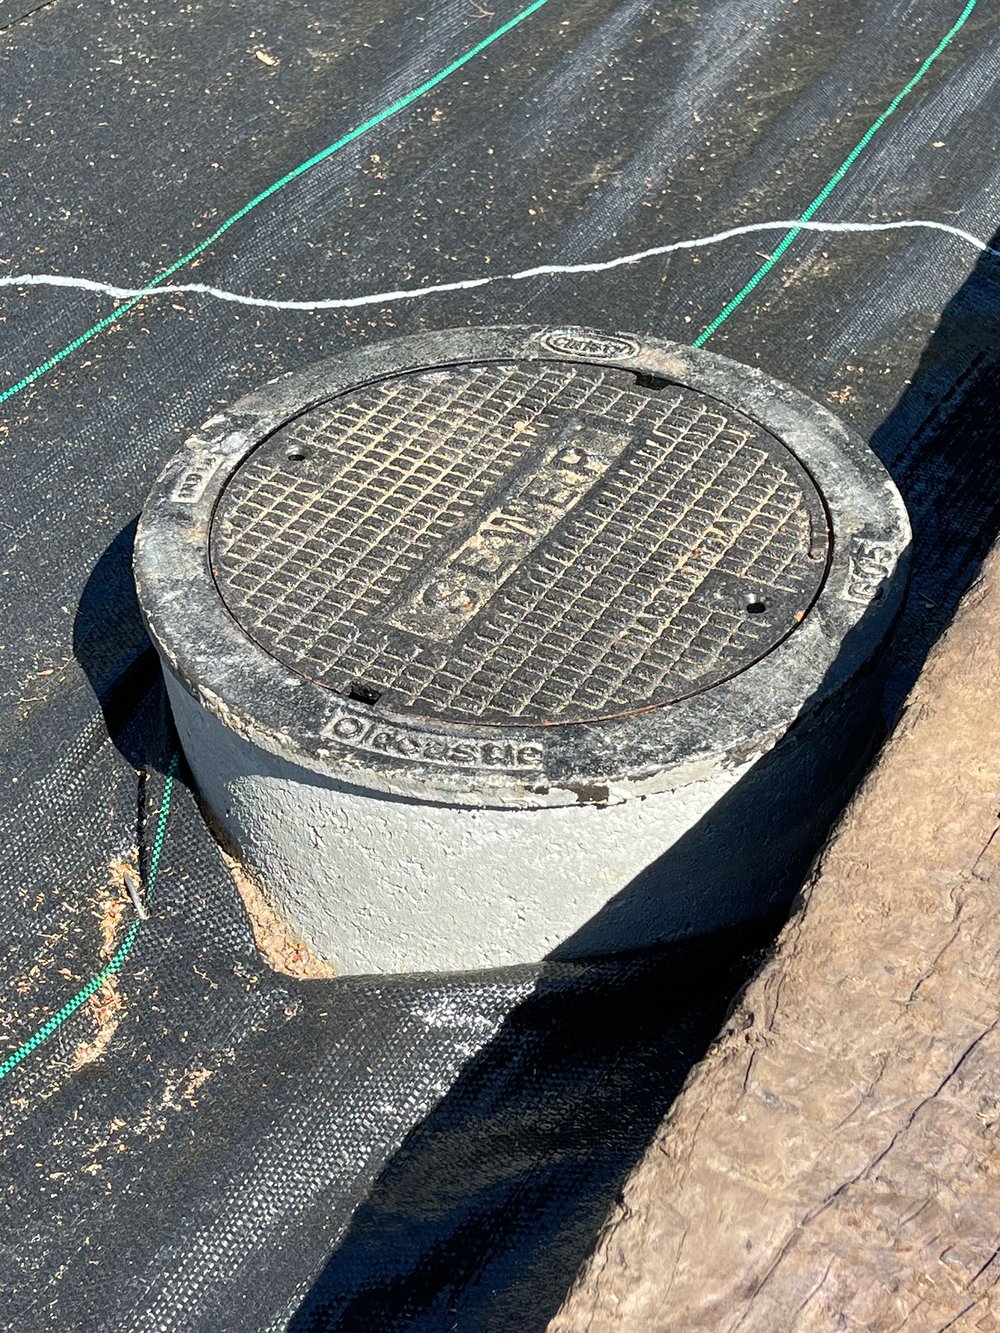  If you don’t like the look of a standard plastic sewer cleanout, contact your local sewer district to see about an upgrade like this concrete and cast iron model. It may be installed at little-to-no-cost to you. 